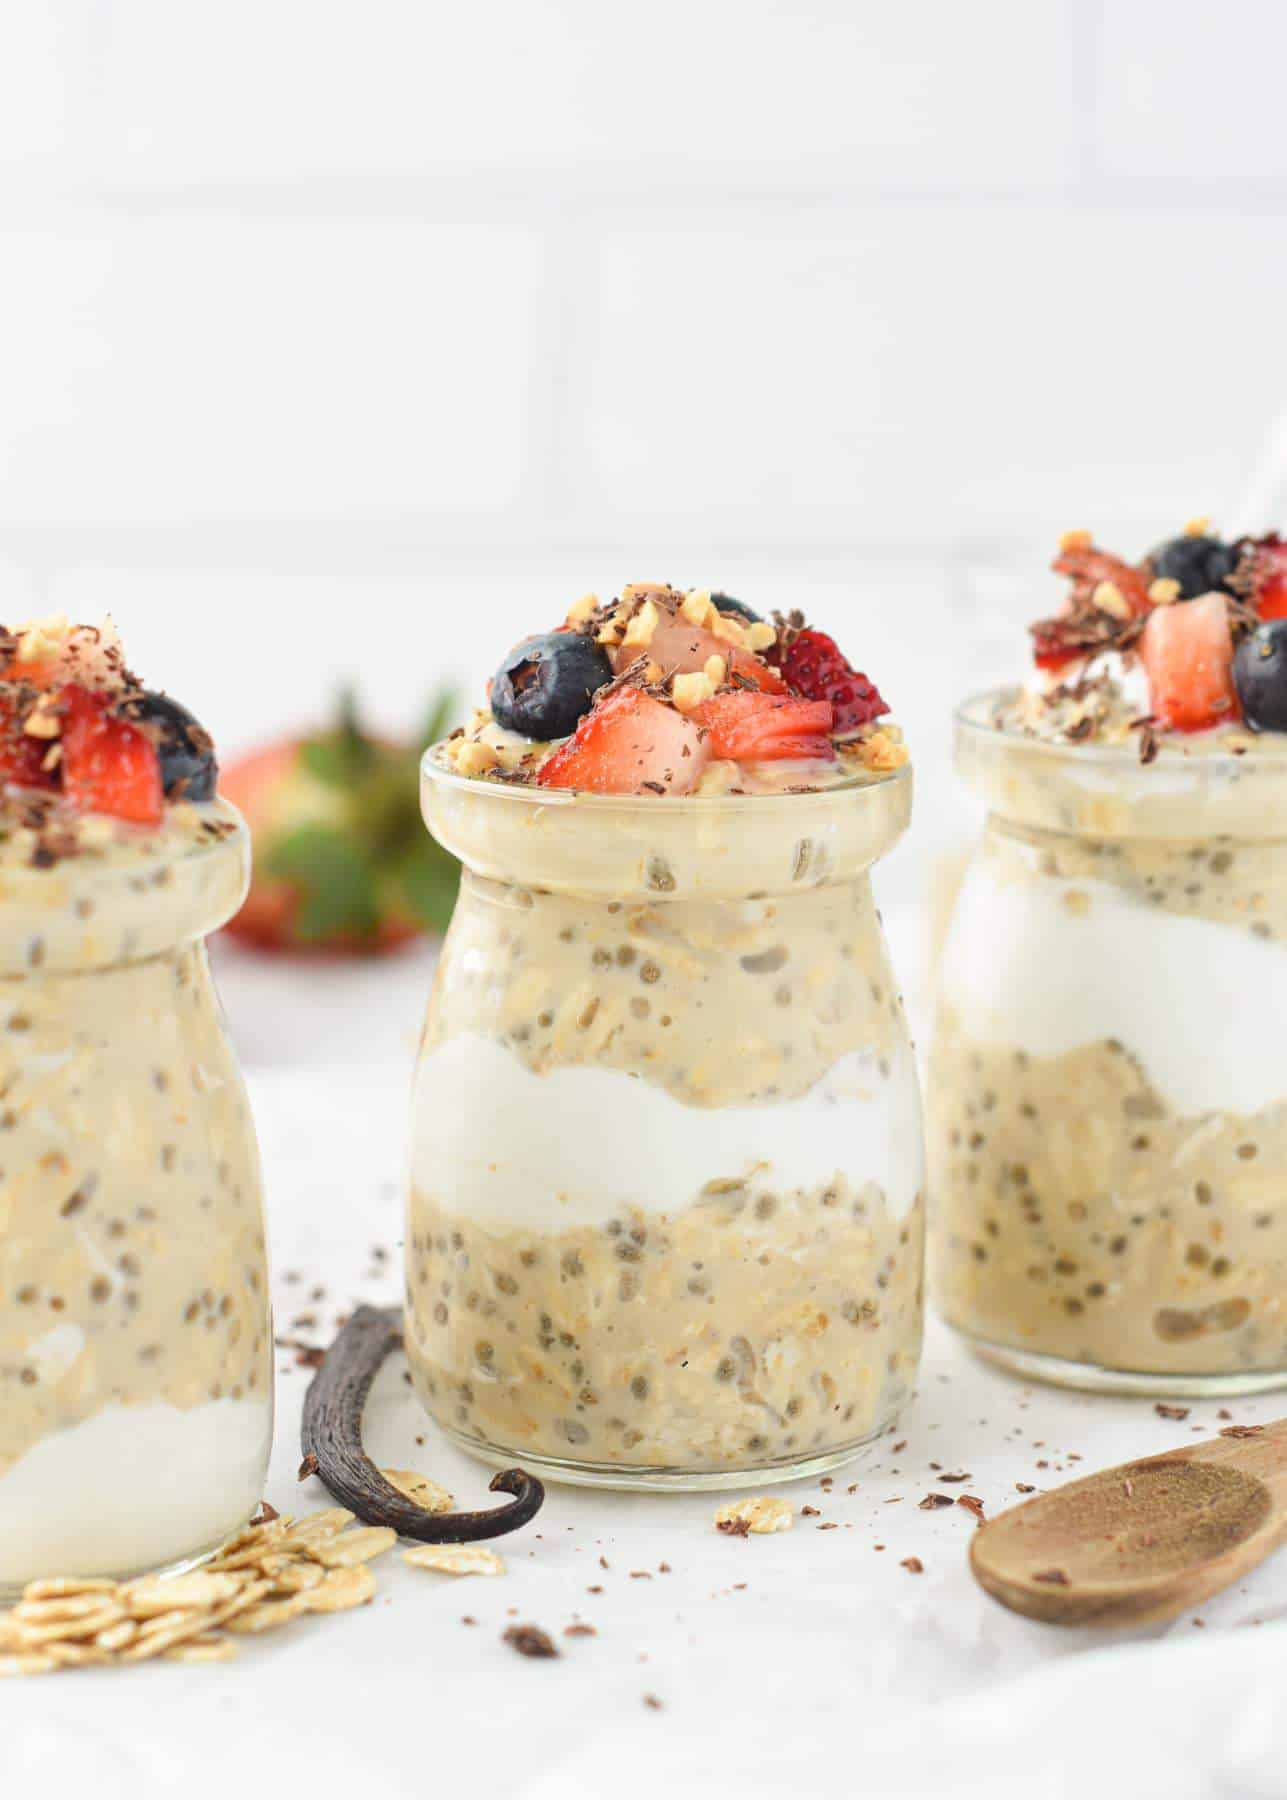 2 Overnight Oats Airtight Jars With Lid And Spoon- 10 Oz